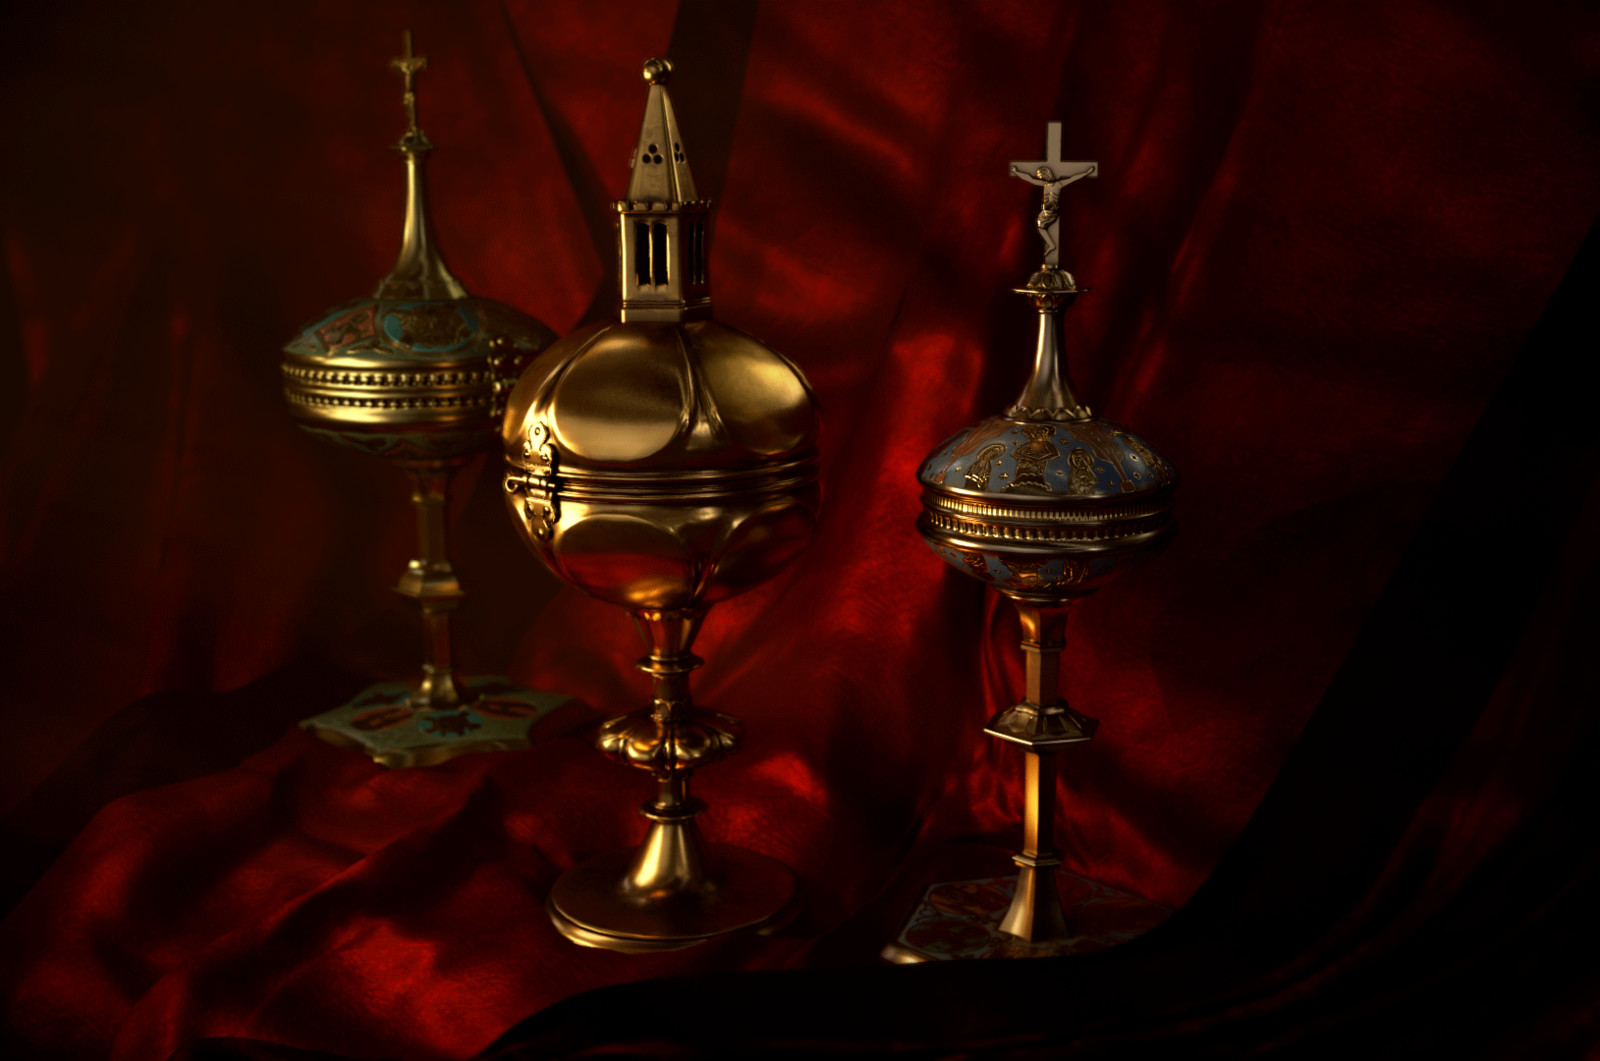 Ciborium assets  modeled and textured by me, velvet shader adapted from SubstanceShare